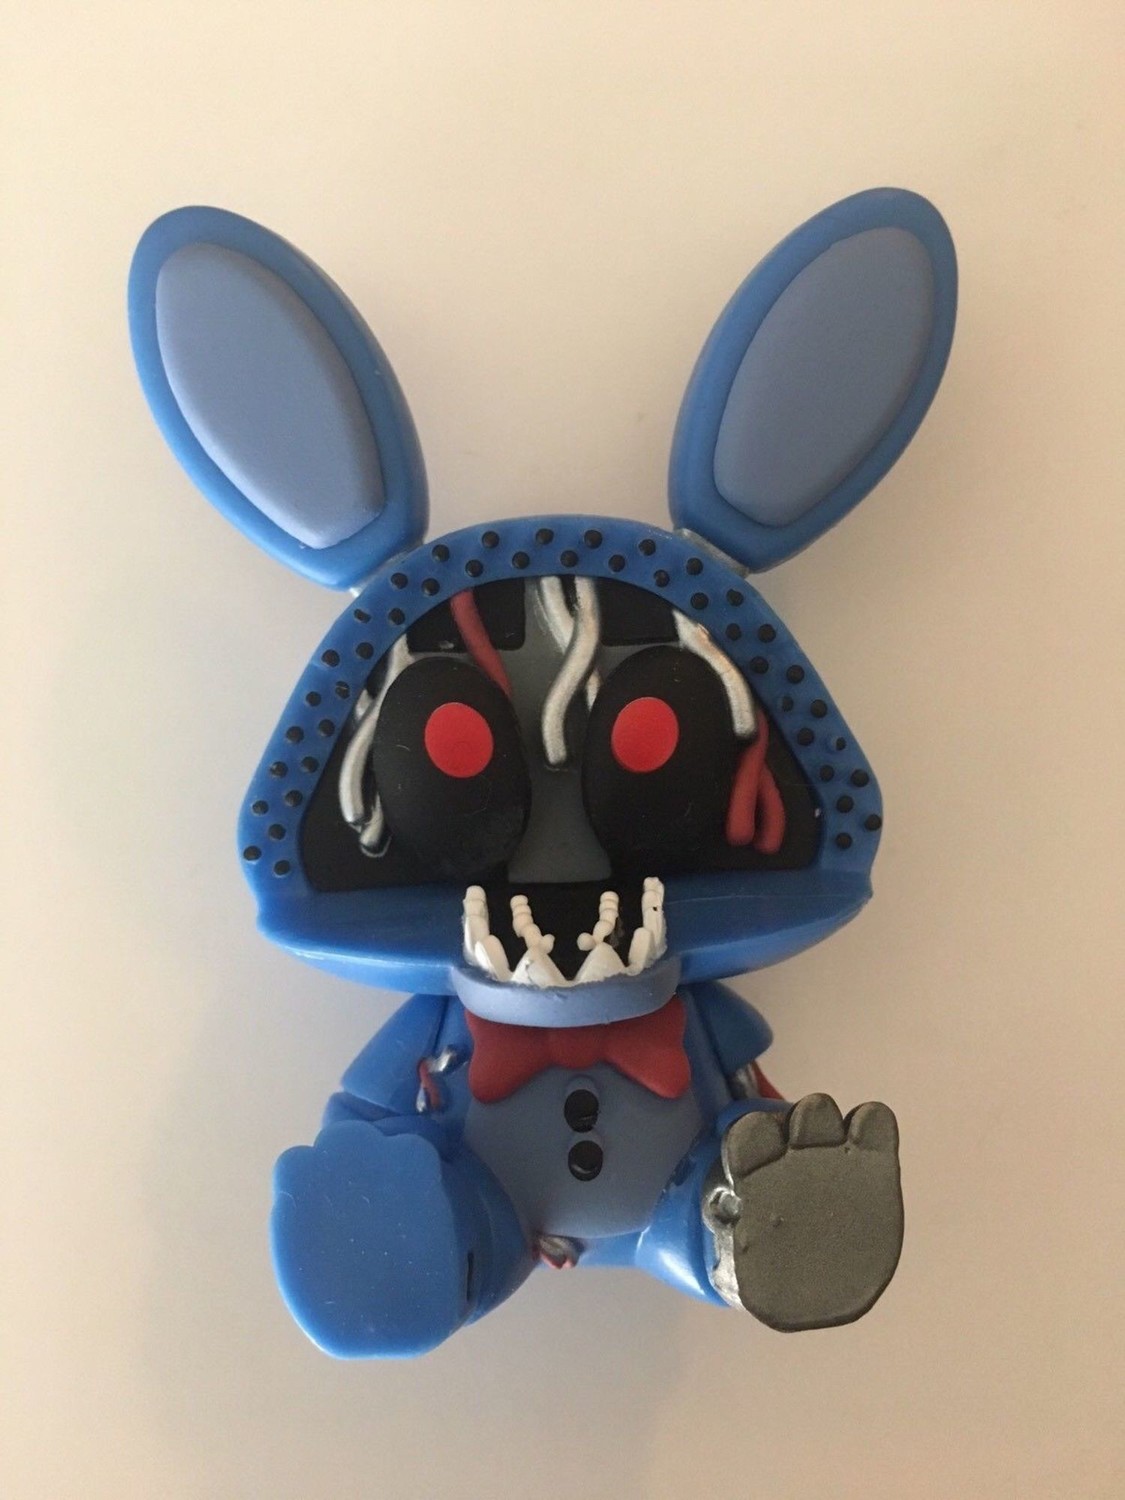 fnaf withered bonnie action figure